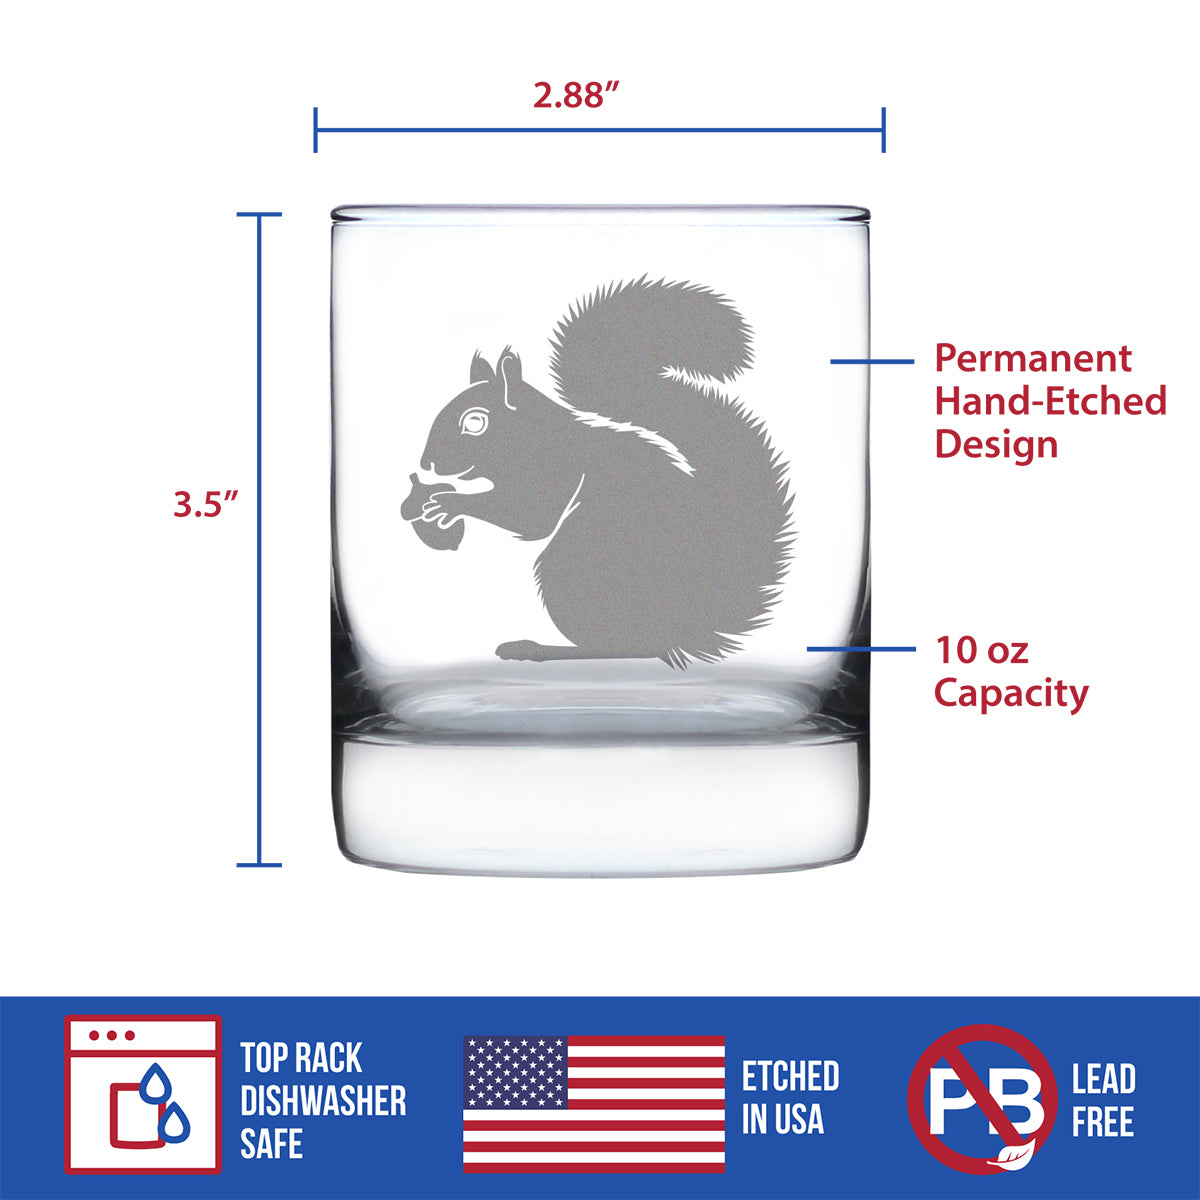 Squirrel Rocks Glass - Squirrel Gifts and Decor with Squirrels - 10.25 Oz Glasses